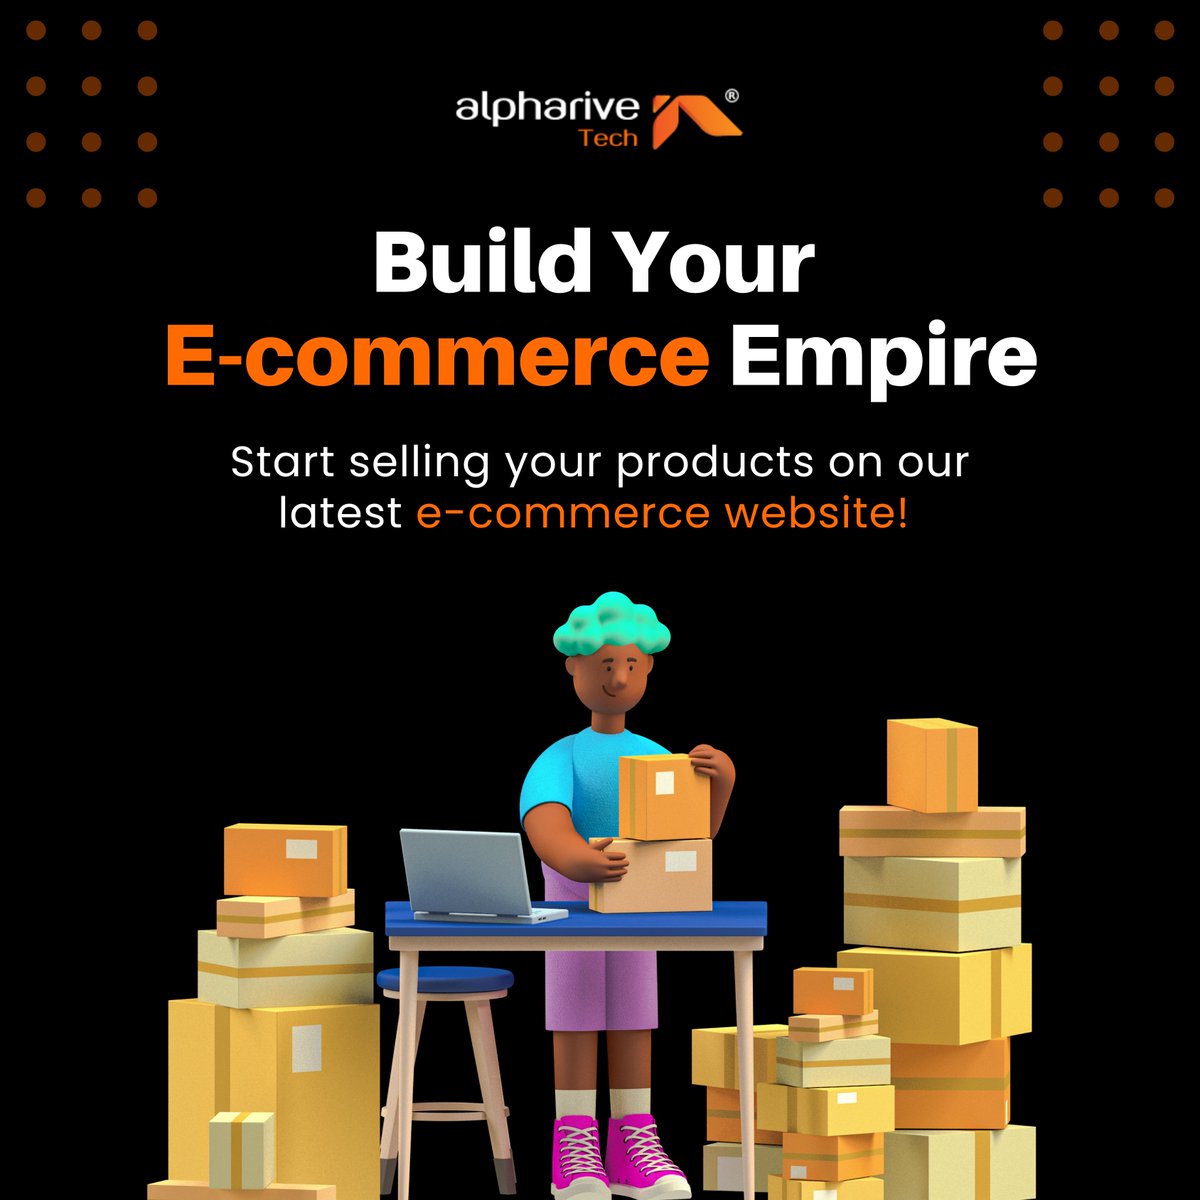 Attention entrepreneurs! Ready to take your business to the next level? #Alpharive can help you do just that.⁣⁣

#EcommerceEmpireBuilder #StartSellingOnline #EcommerceSuccess #OnlineStoreLaunch #DigitalMarketplace #EcommerceWebsite
#SellYourProducts #GrowYourBusiness